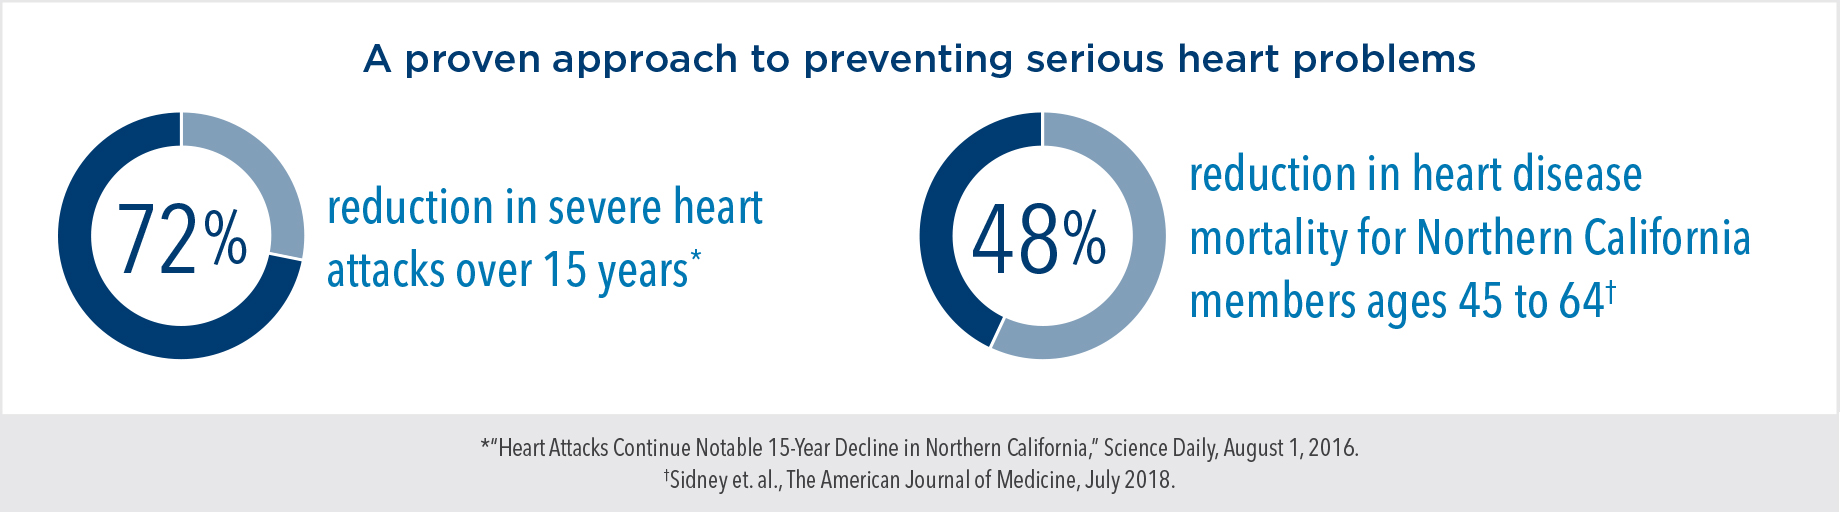 A proven approach to preventing serious heart problems: 72% reduction in severe heart attacks over 15 years; 48% reduction in heart disease mortality for Northern California members ages 45 to 64.